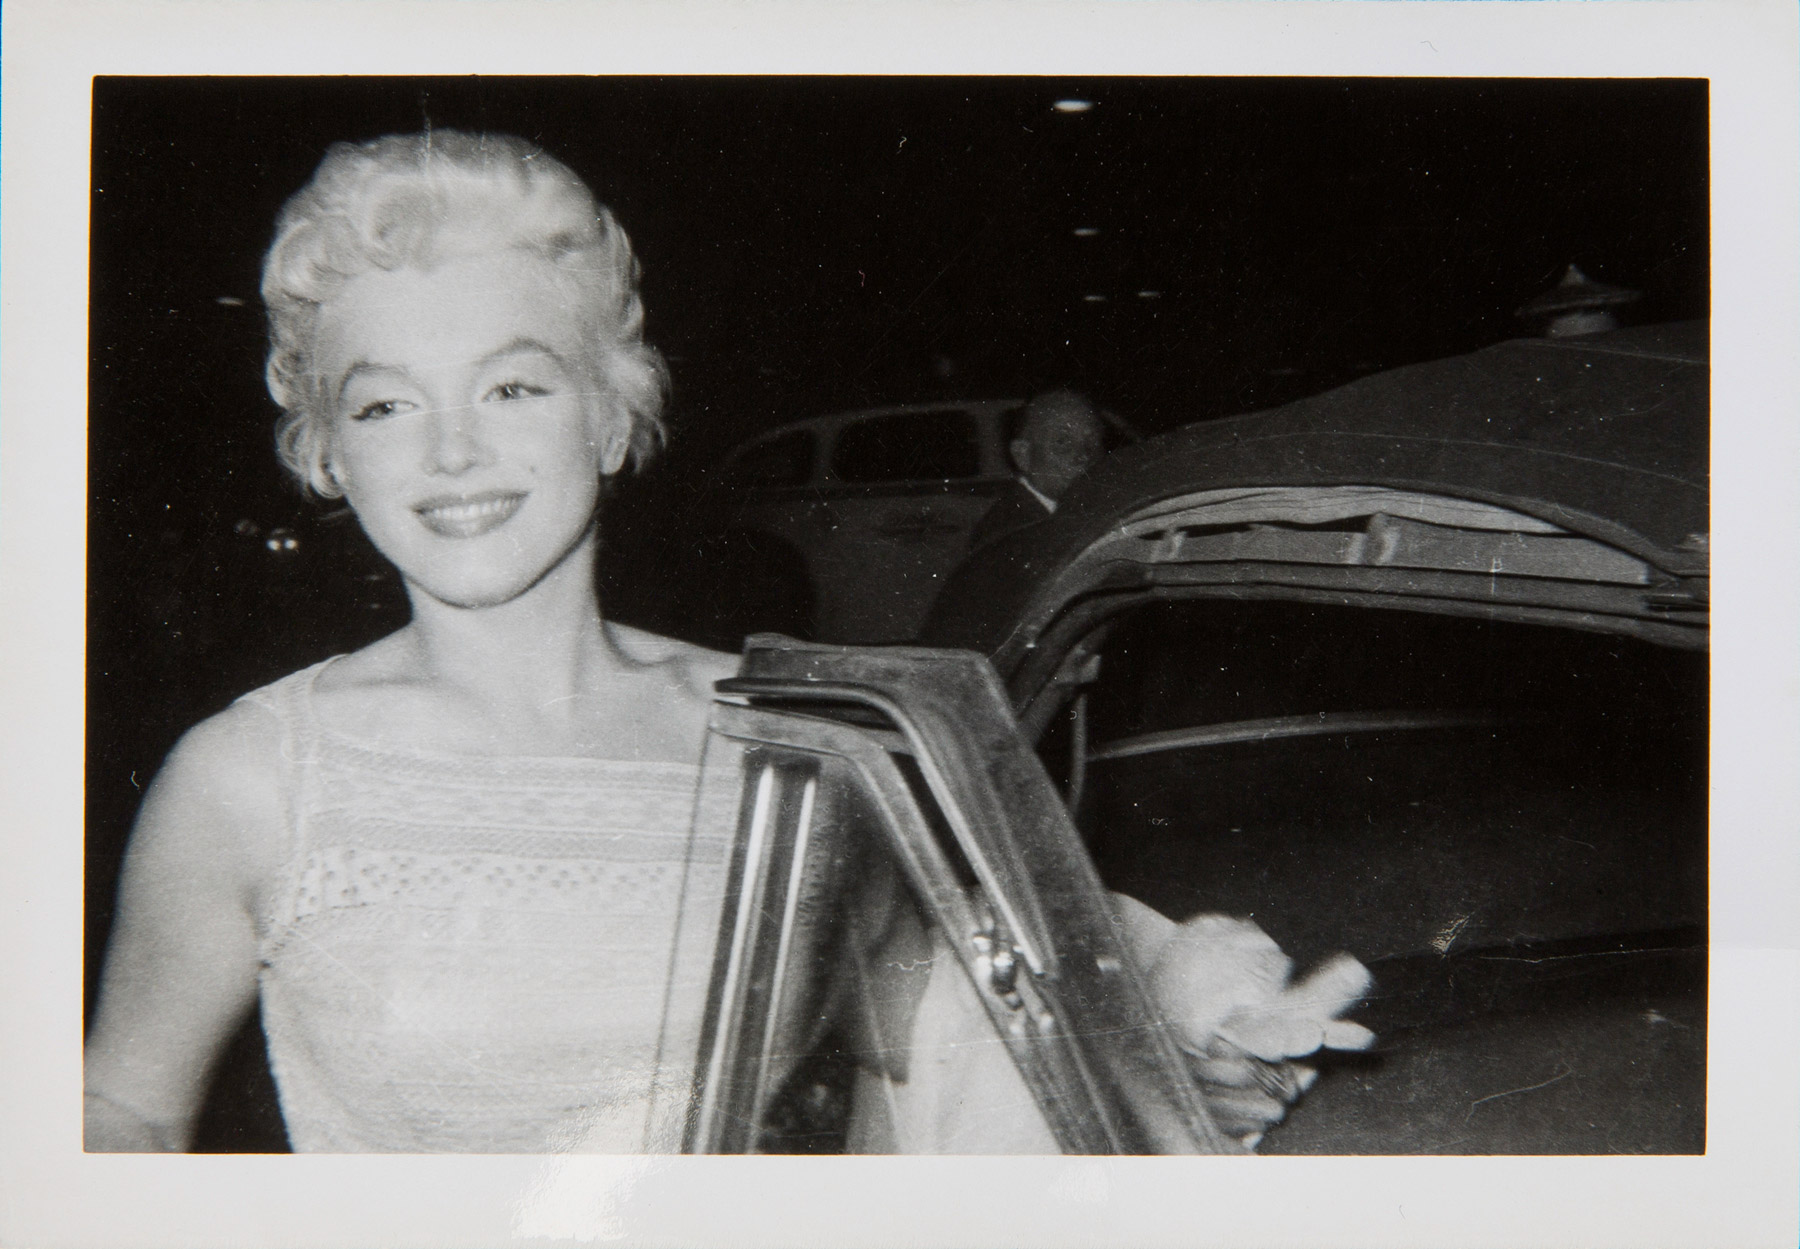 Marilyn Monroe in 1955, possibly going to a birthday party for Elia Kazan on September 7.